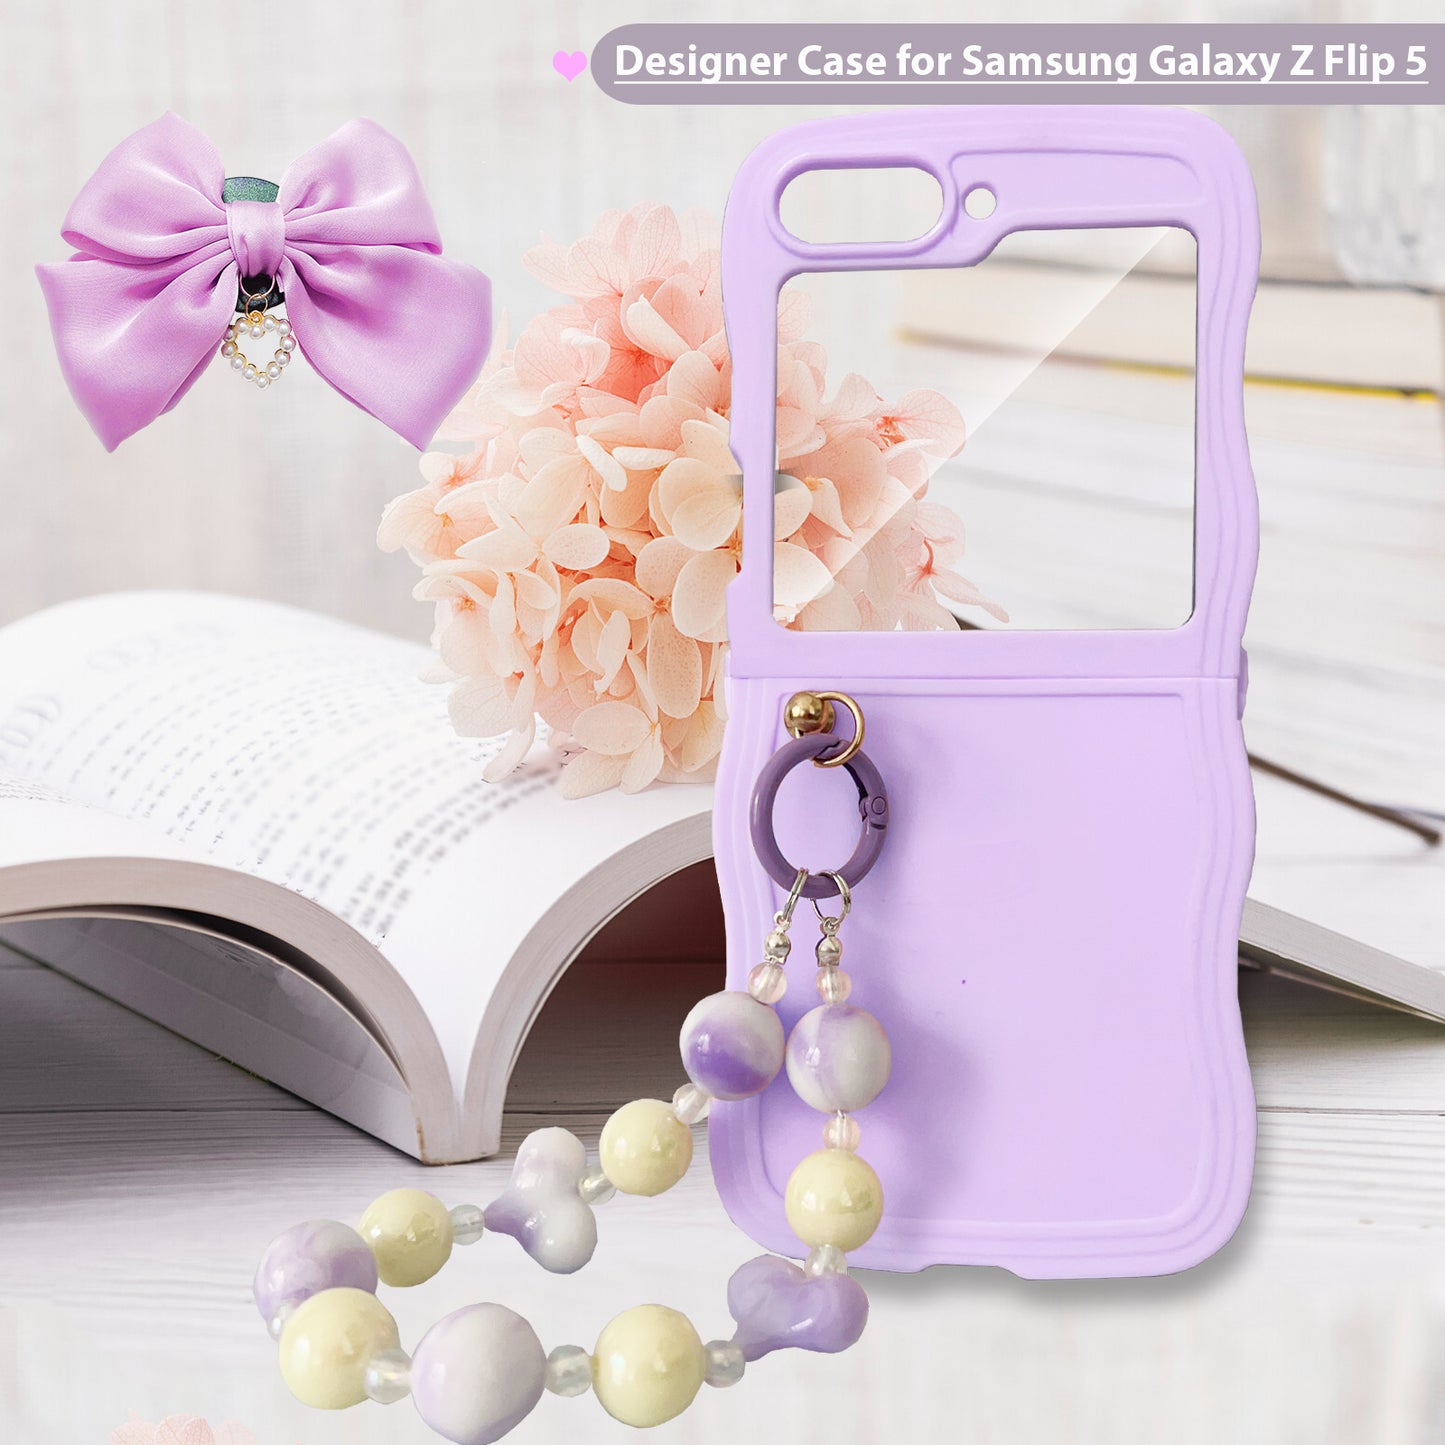 Fashion Case for Samsung Galaxy Z Flip 5 Case Cute with Big Bow, Soft TPU . Hinge Connection and Screen Protector